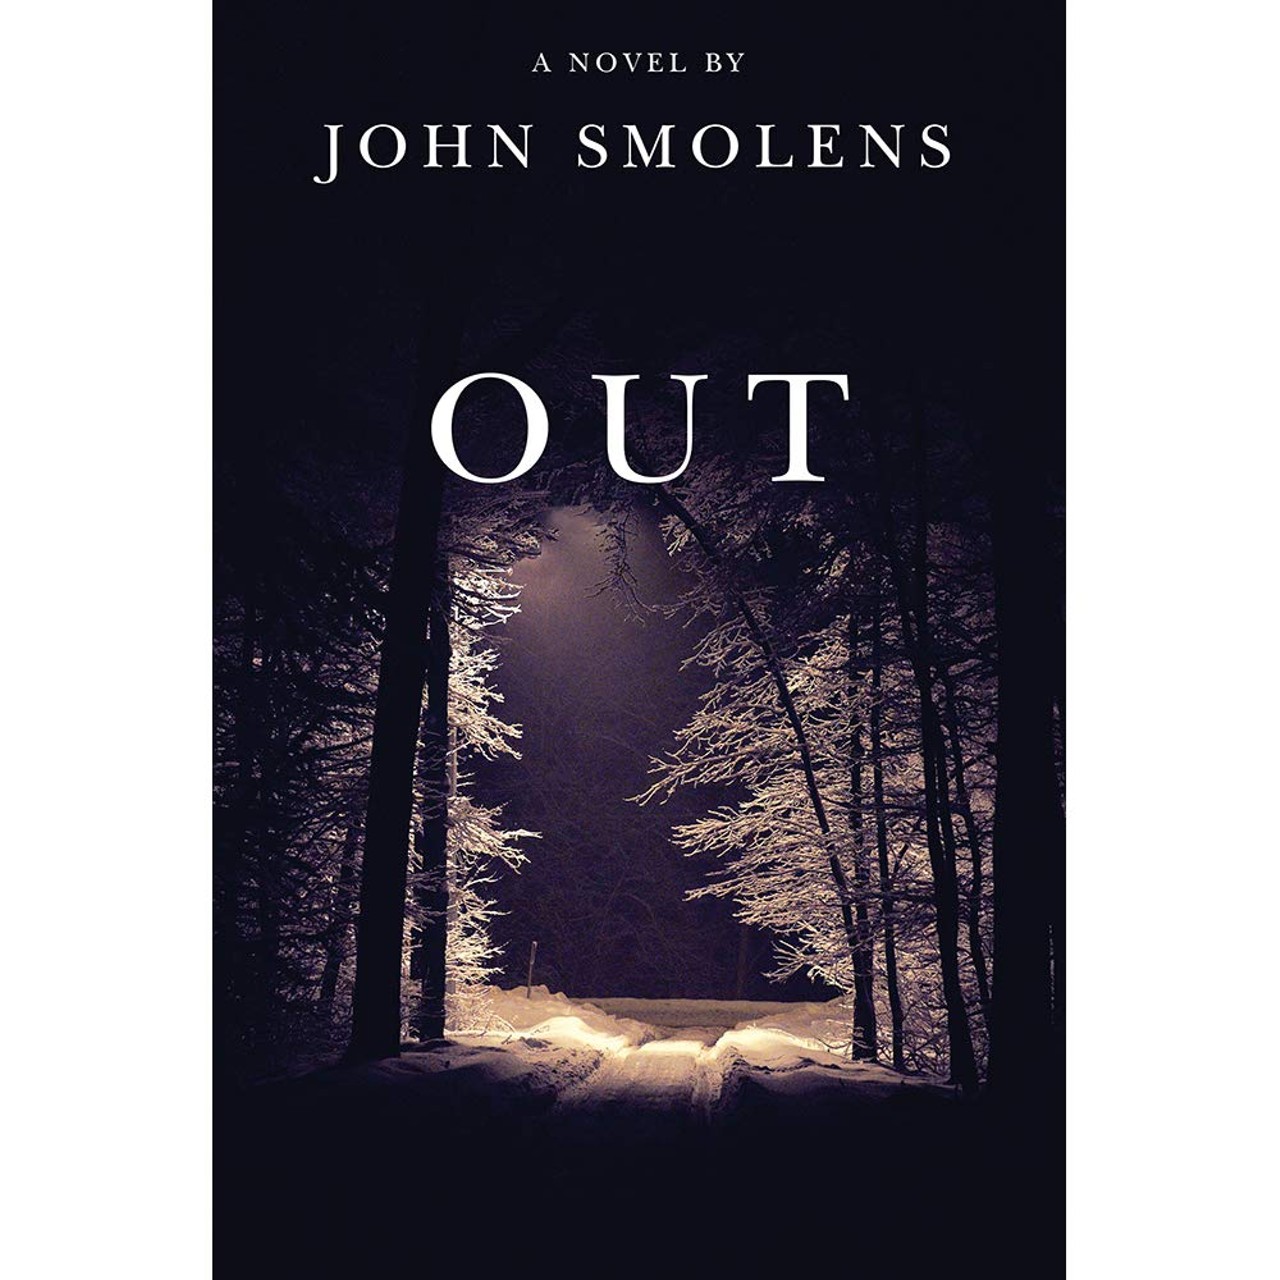 Out
John Smolens&#146; most recent novel has been selected as a Library of Michigan Notable Book. In 2010, Smolens was the recipient of the Michigan Author of the Year Award from the Michigan Library Association. His U.P.-based book, Out, set deep in the woods of Michigan&#146;s Upper Peninsula, is the sequel to his internationally acclaimed novel Cold, where once again nature and human nature collide.